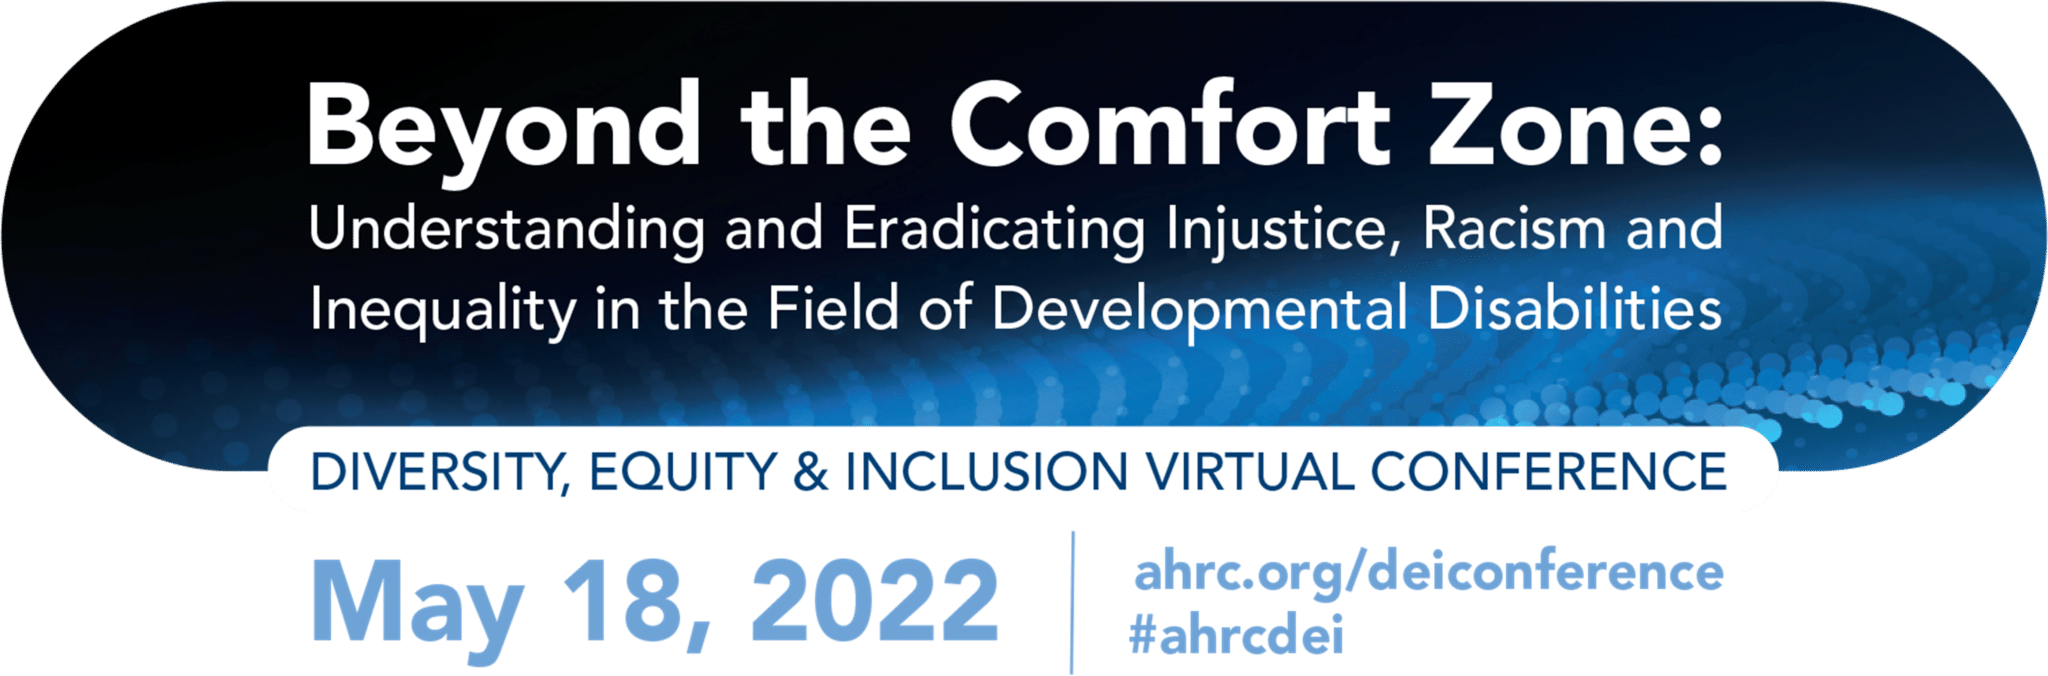 AHRC Nassau’s DEI Virtual Conference, “Beyond the Comfort Zone: Understanding and Eradicating Injustice, Racism and Inequality in the Field of Developmental Disabilities” May 18, 2022, www.ahrc.org/deiconference